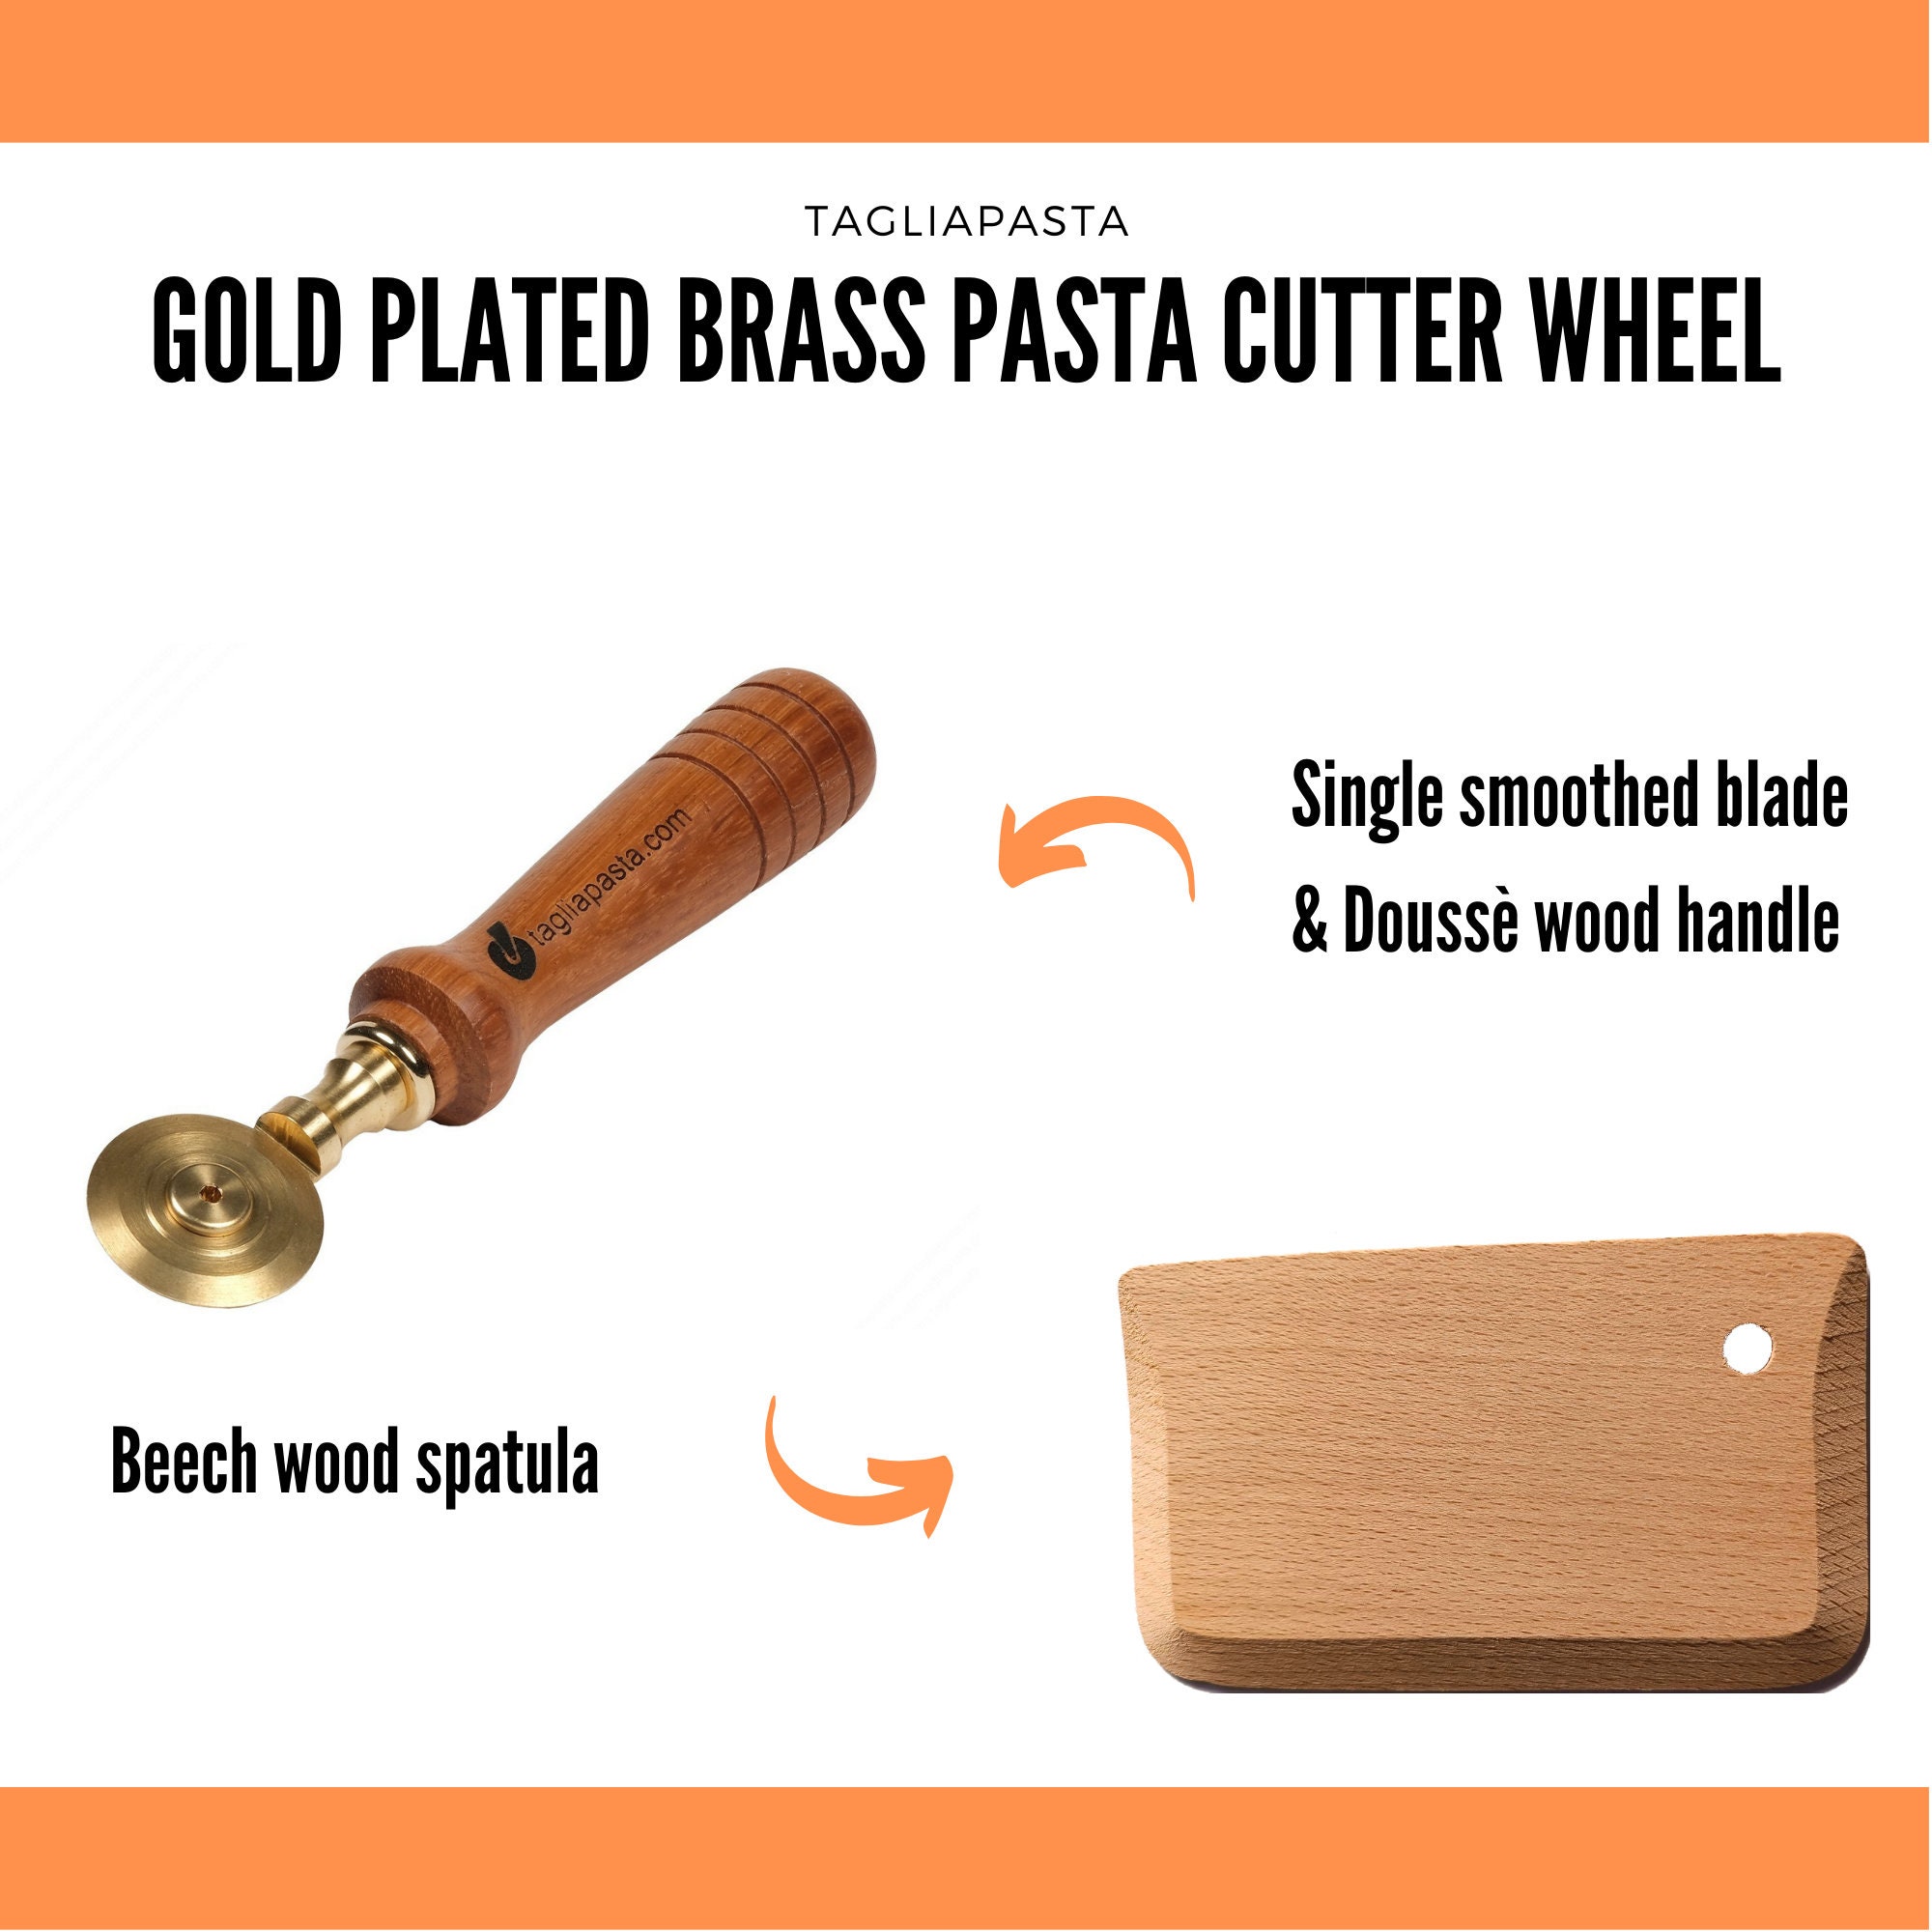 Pasta Cutter smooth steel blades: Tortellini, Cappelletti and Anolini